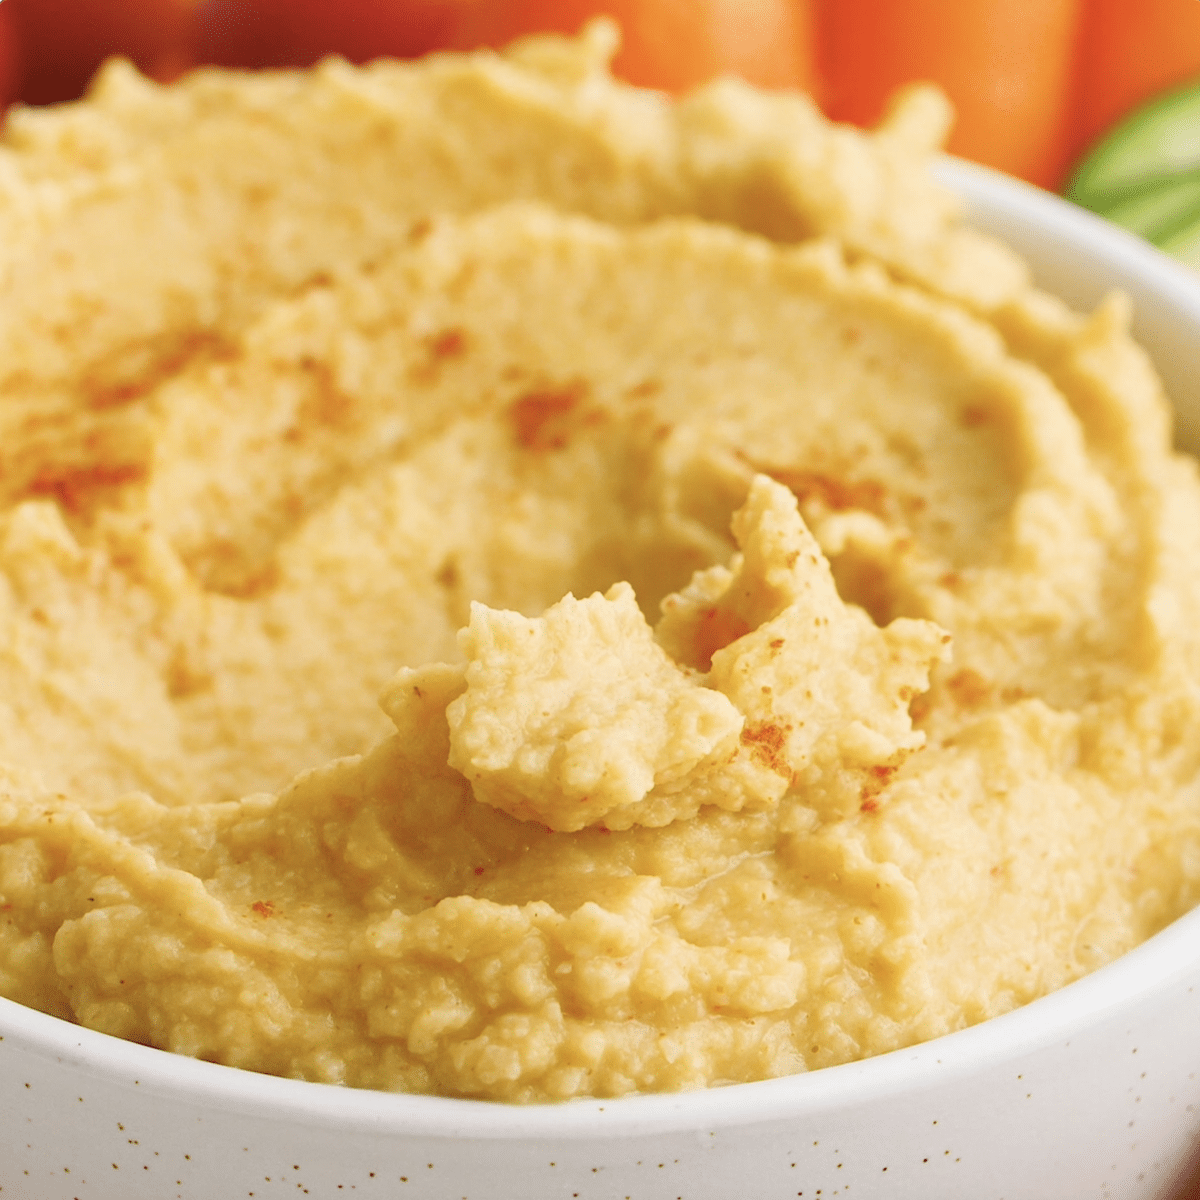 Close up view of hummus in a white bowl